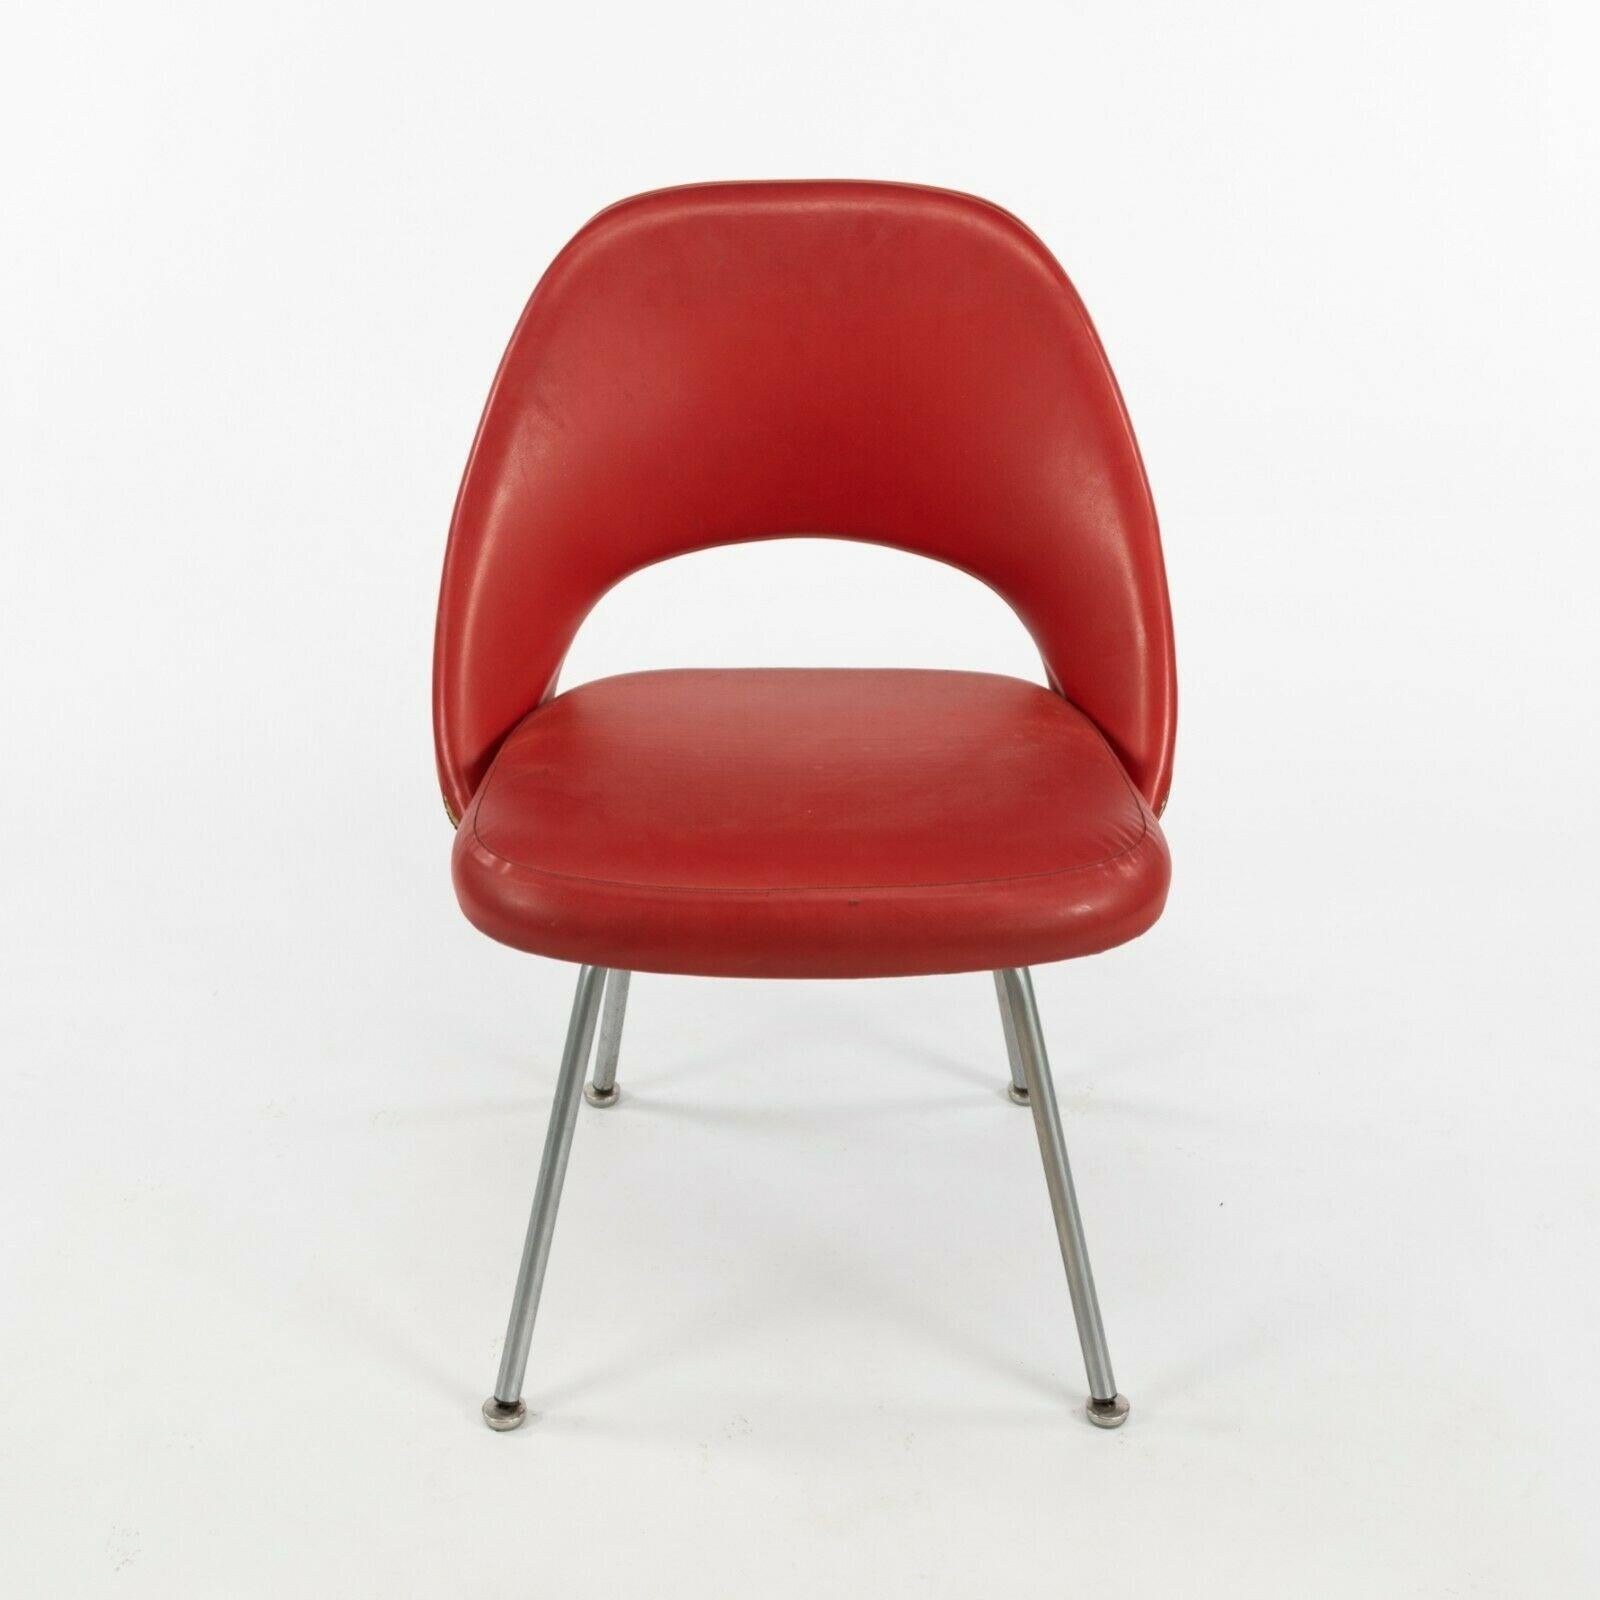 Modern 1963 Pair of Eero Saarinen for Knoll Red Vinyl Armless Executive Dining Chairs For Sale